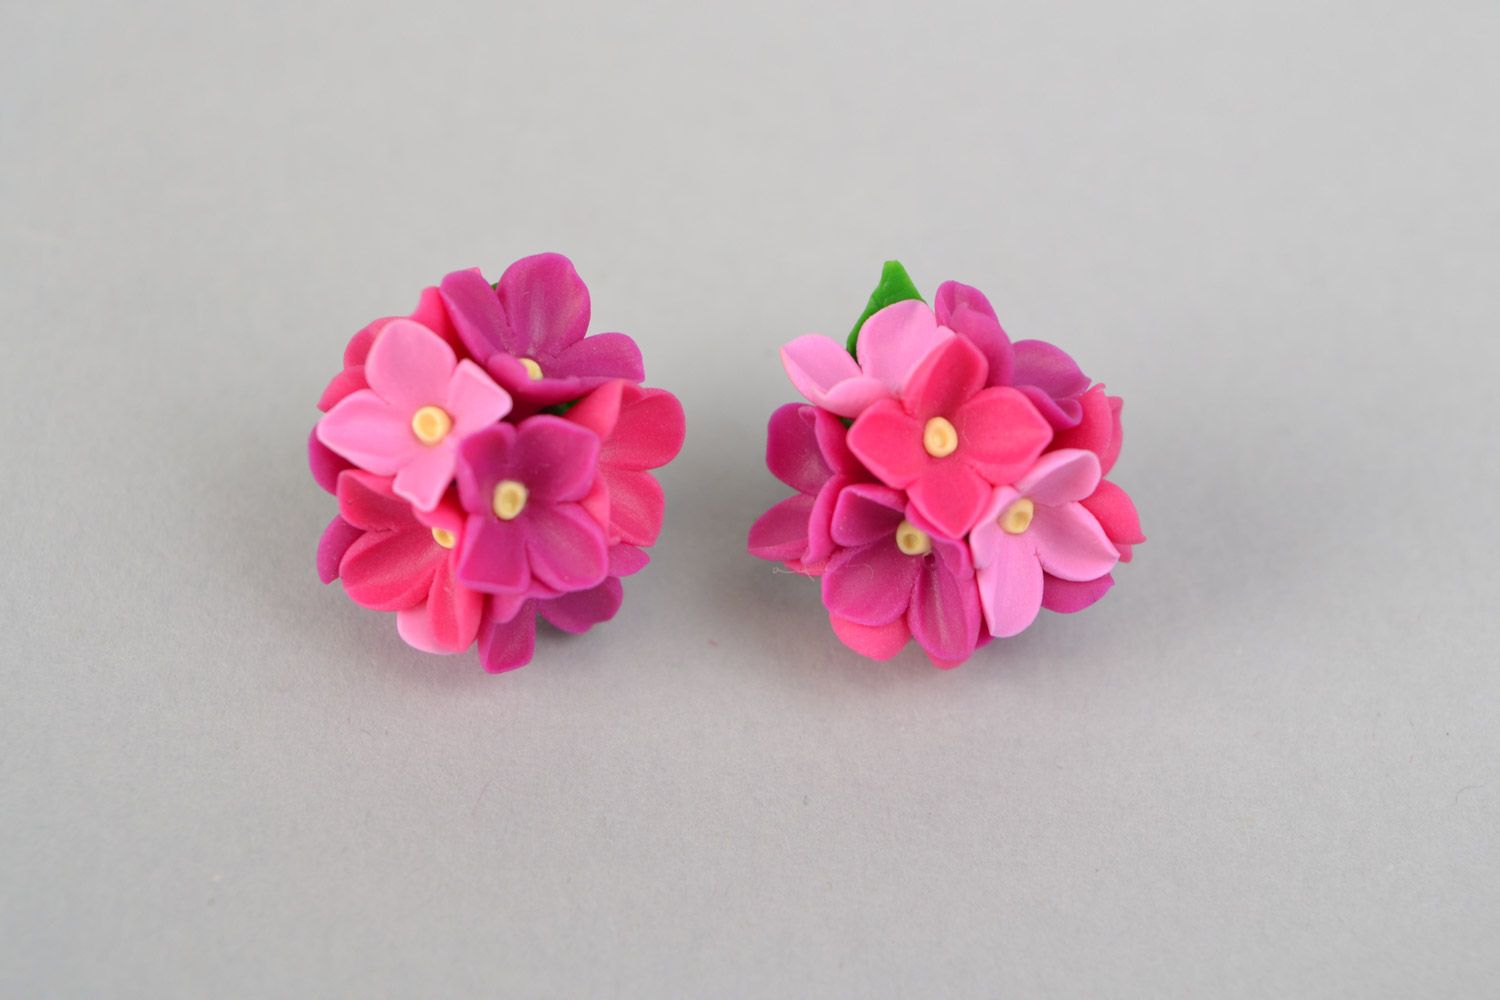 Homemade polymer clay stud earrings with lilac flower bouquets for ladies photo 3